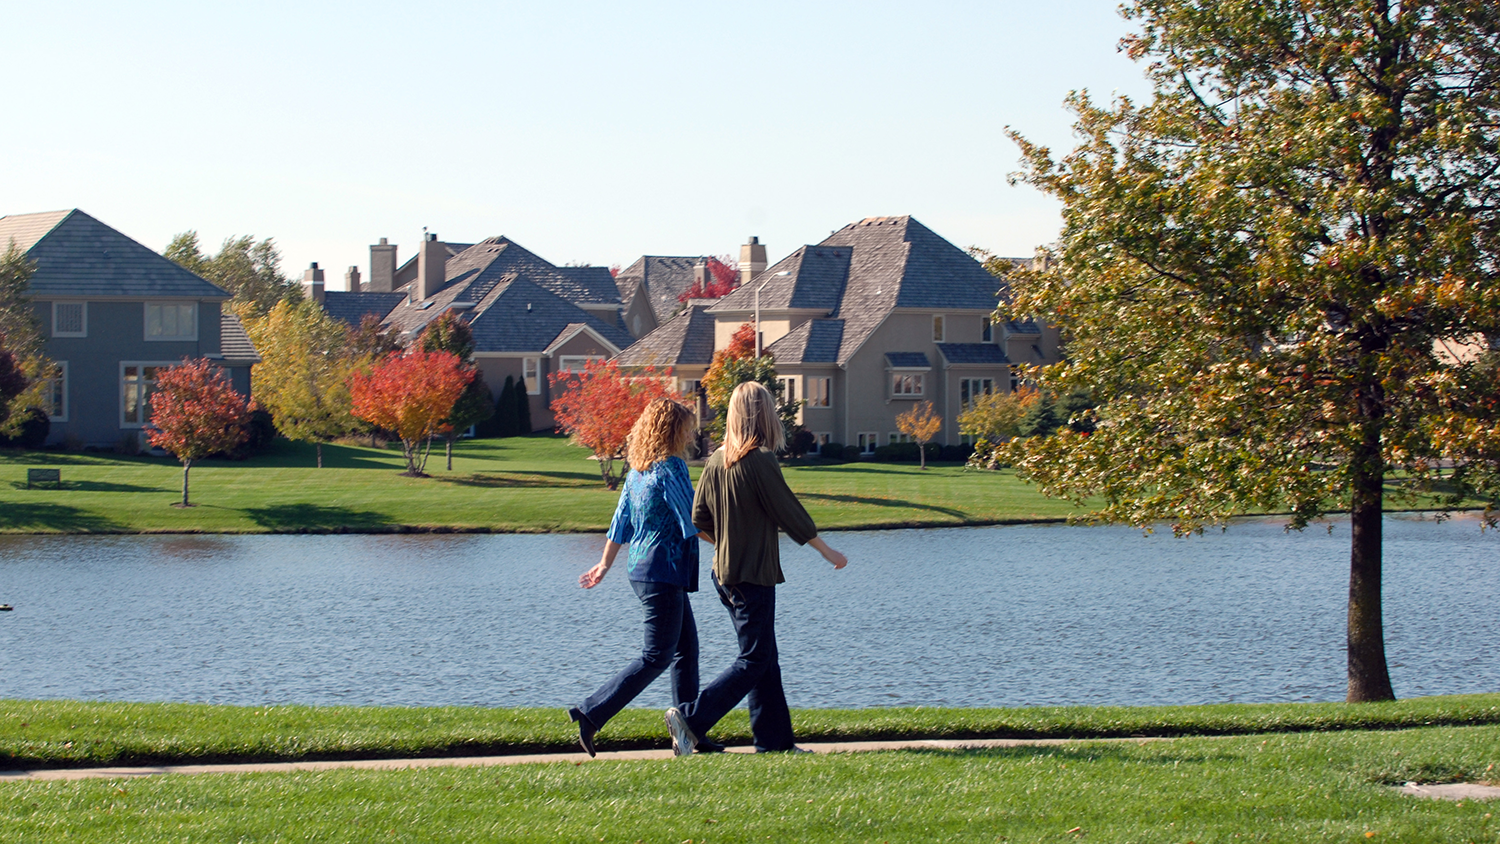 Two women walk side-by-side down a park trail with neighborhood homes visible across a lake.